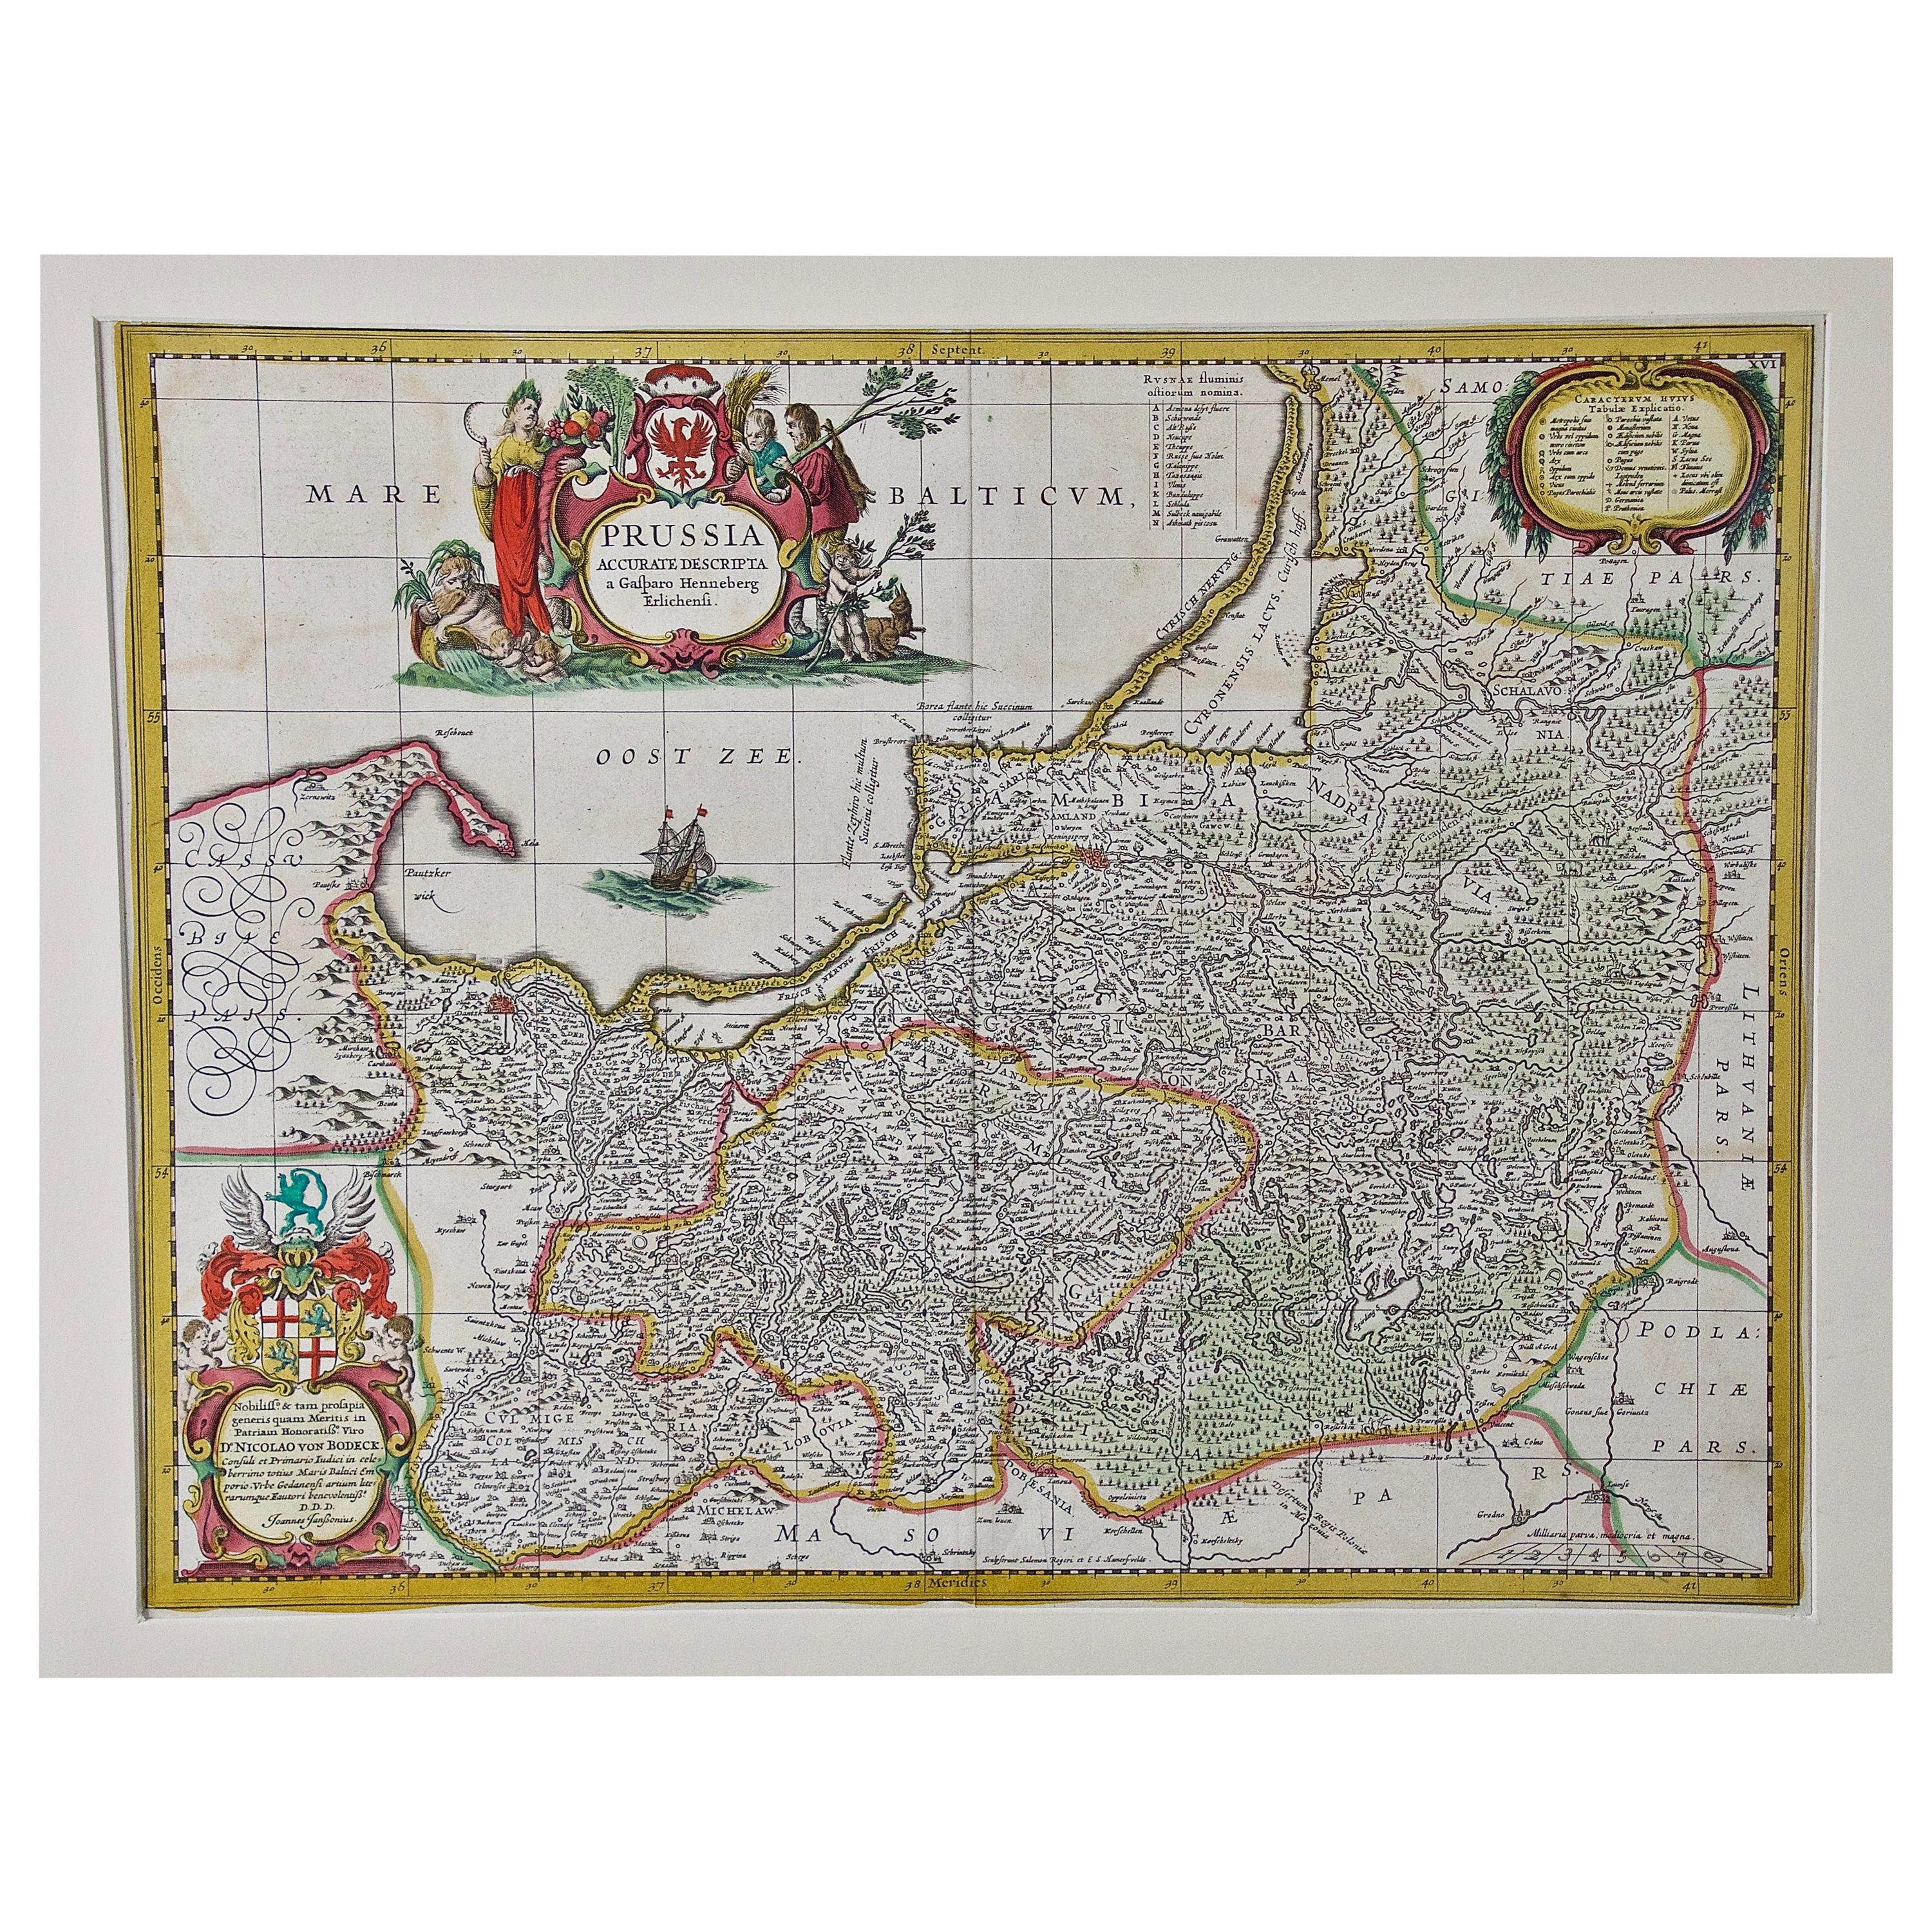 Prussia, Poland, N. Germany, Etc: A Hand-colored 17th Century Map by Janssonius